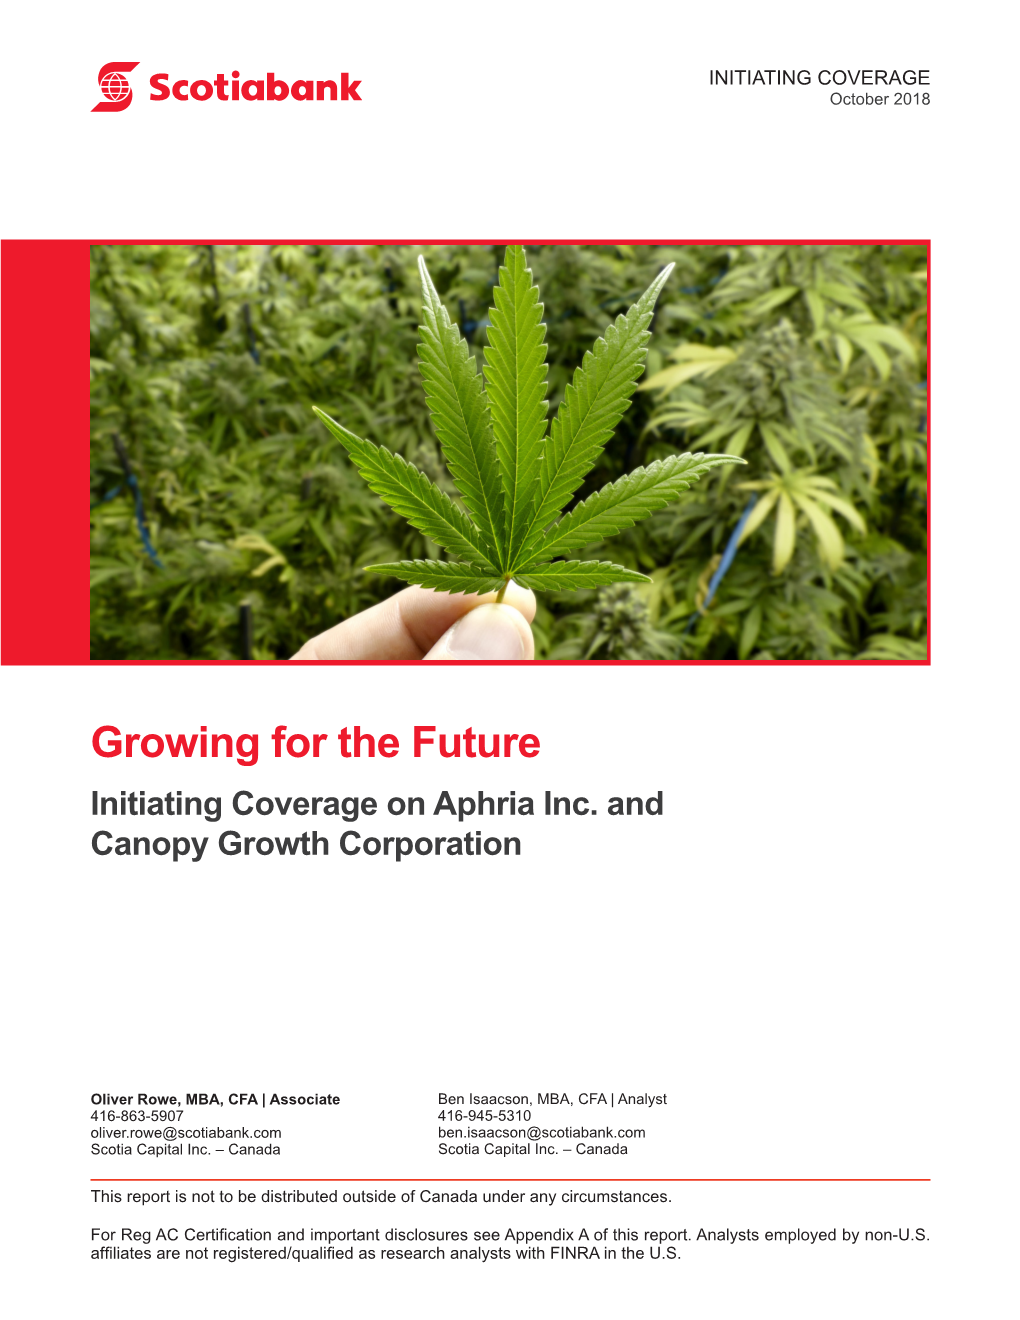 Growing for the Future Initiating Coverage on Aphria Inc